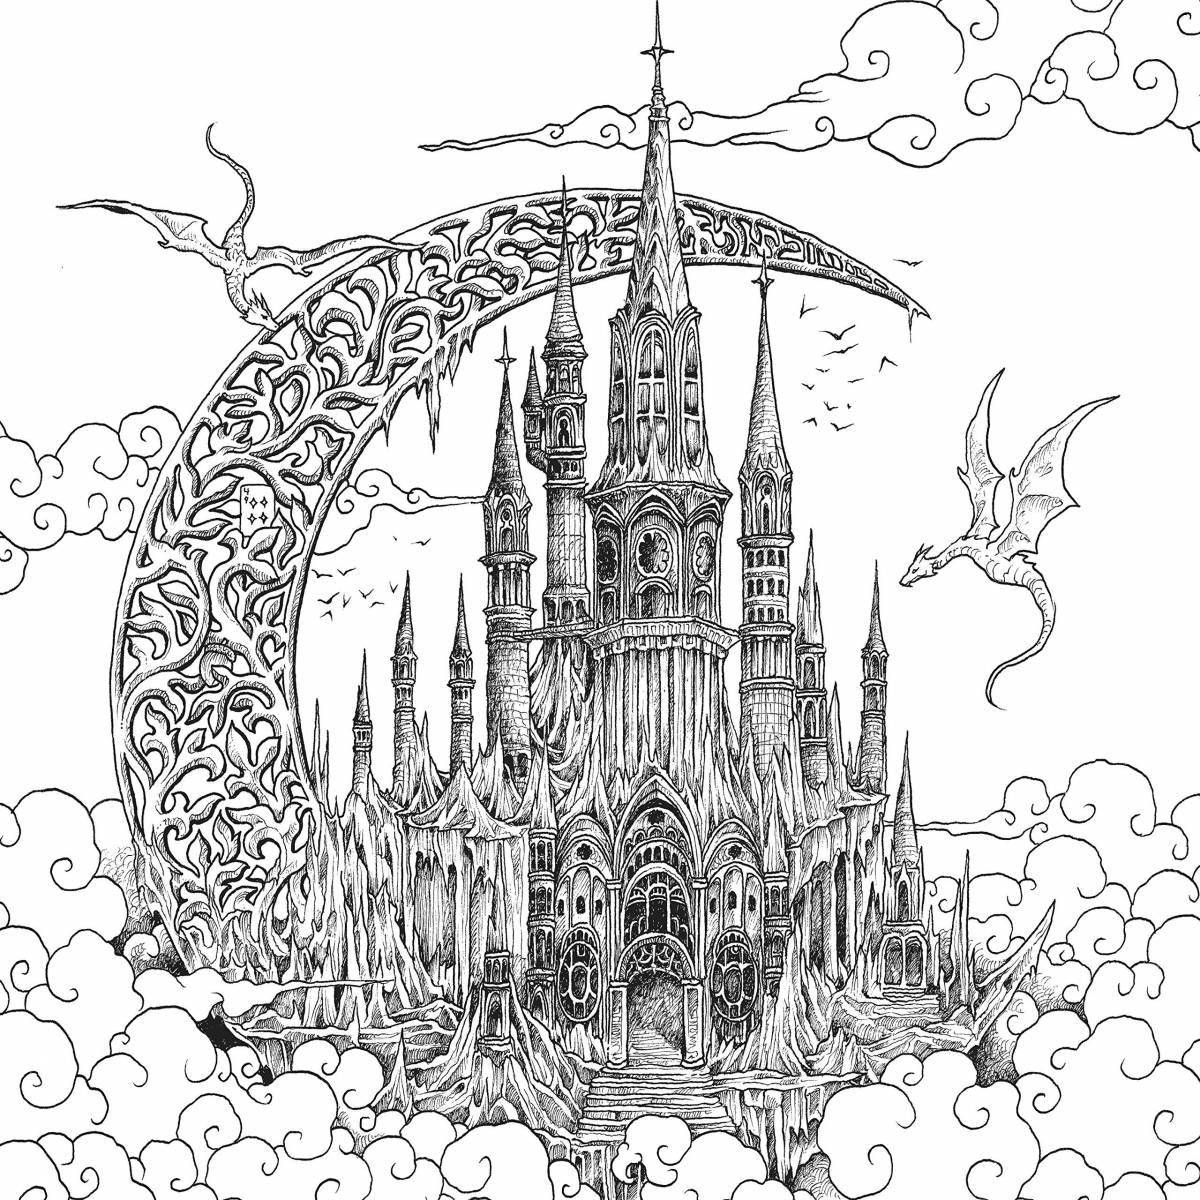 Coloring book royal gothic castle